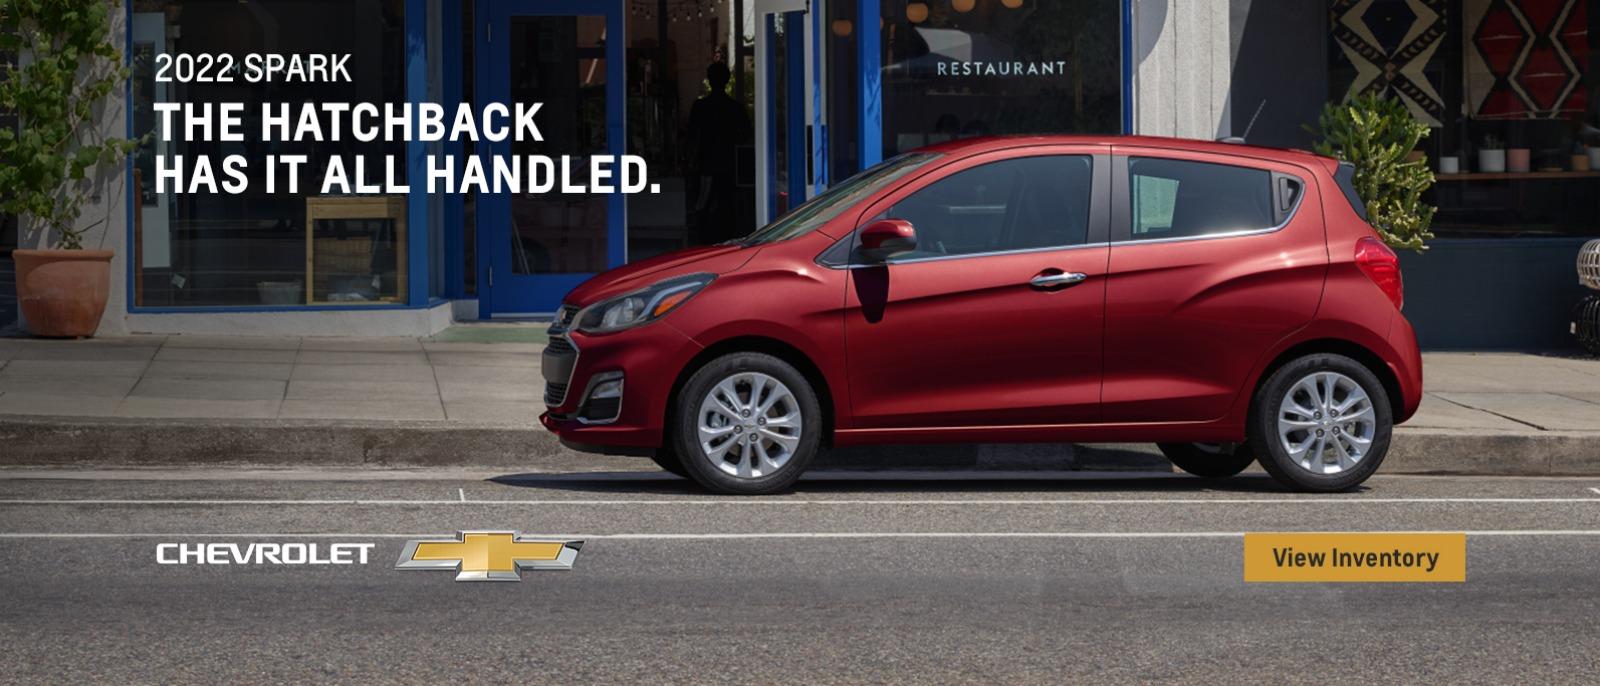 2022 Chevy Spark. The hatchback has it all handled.